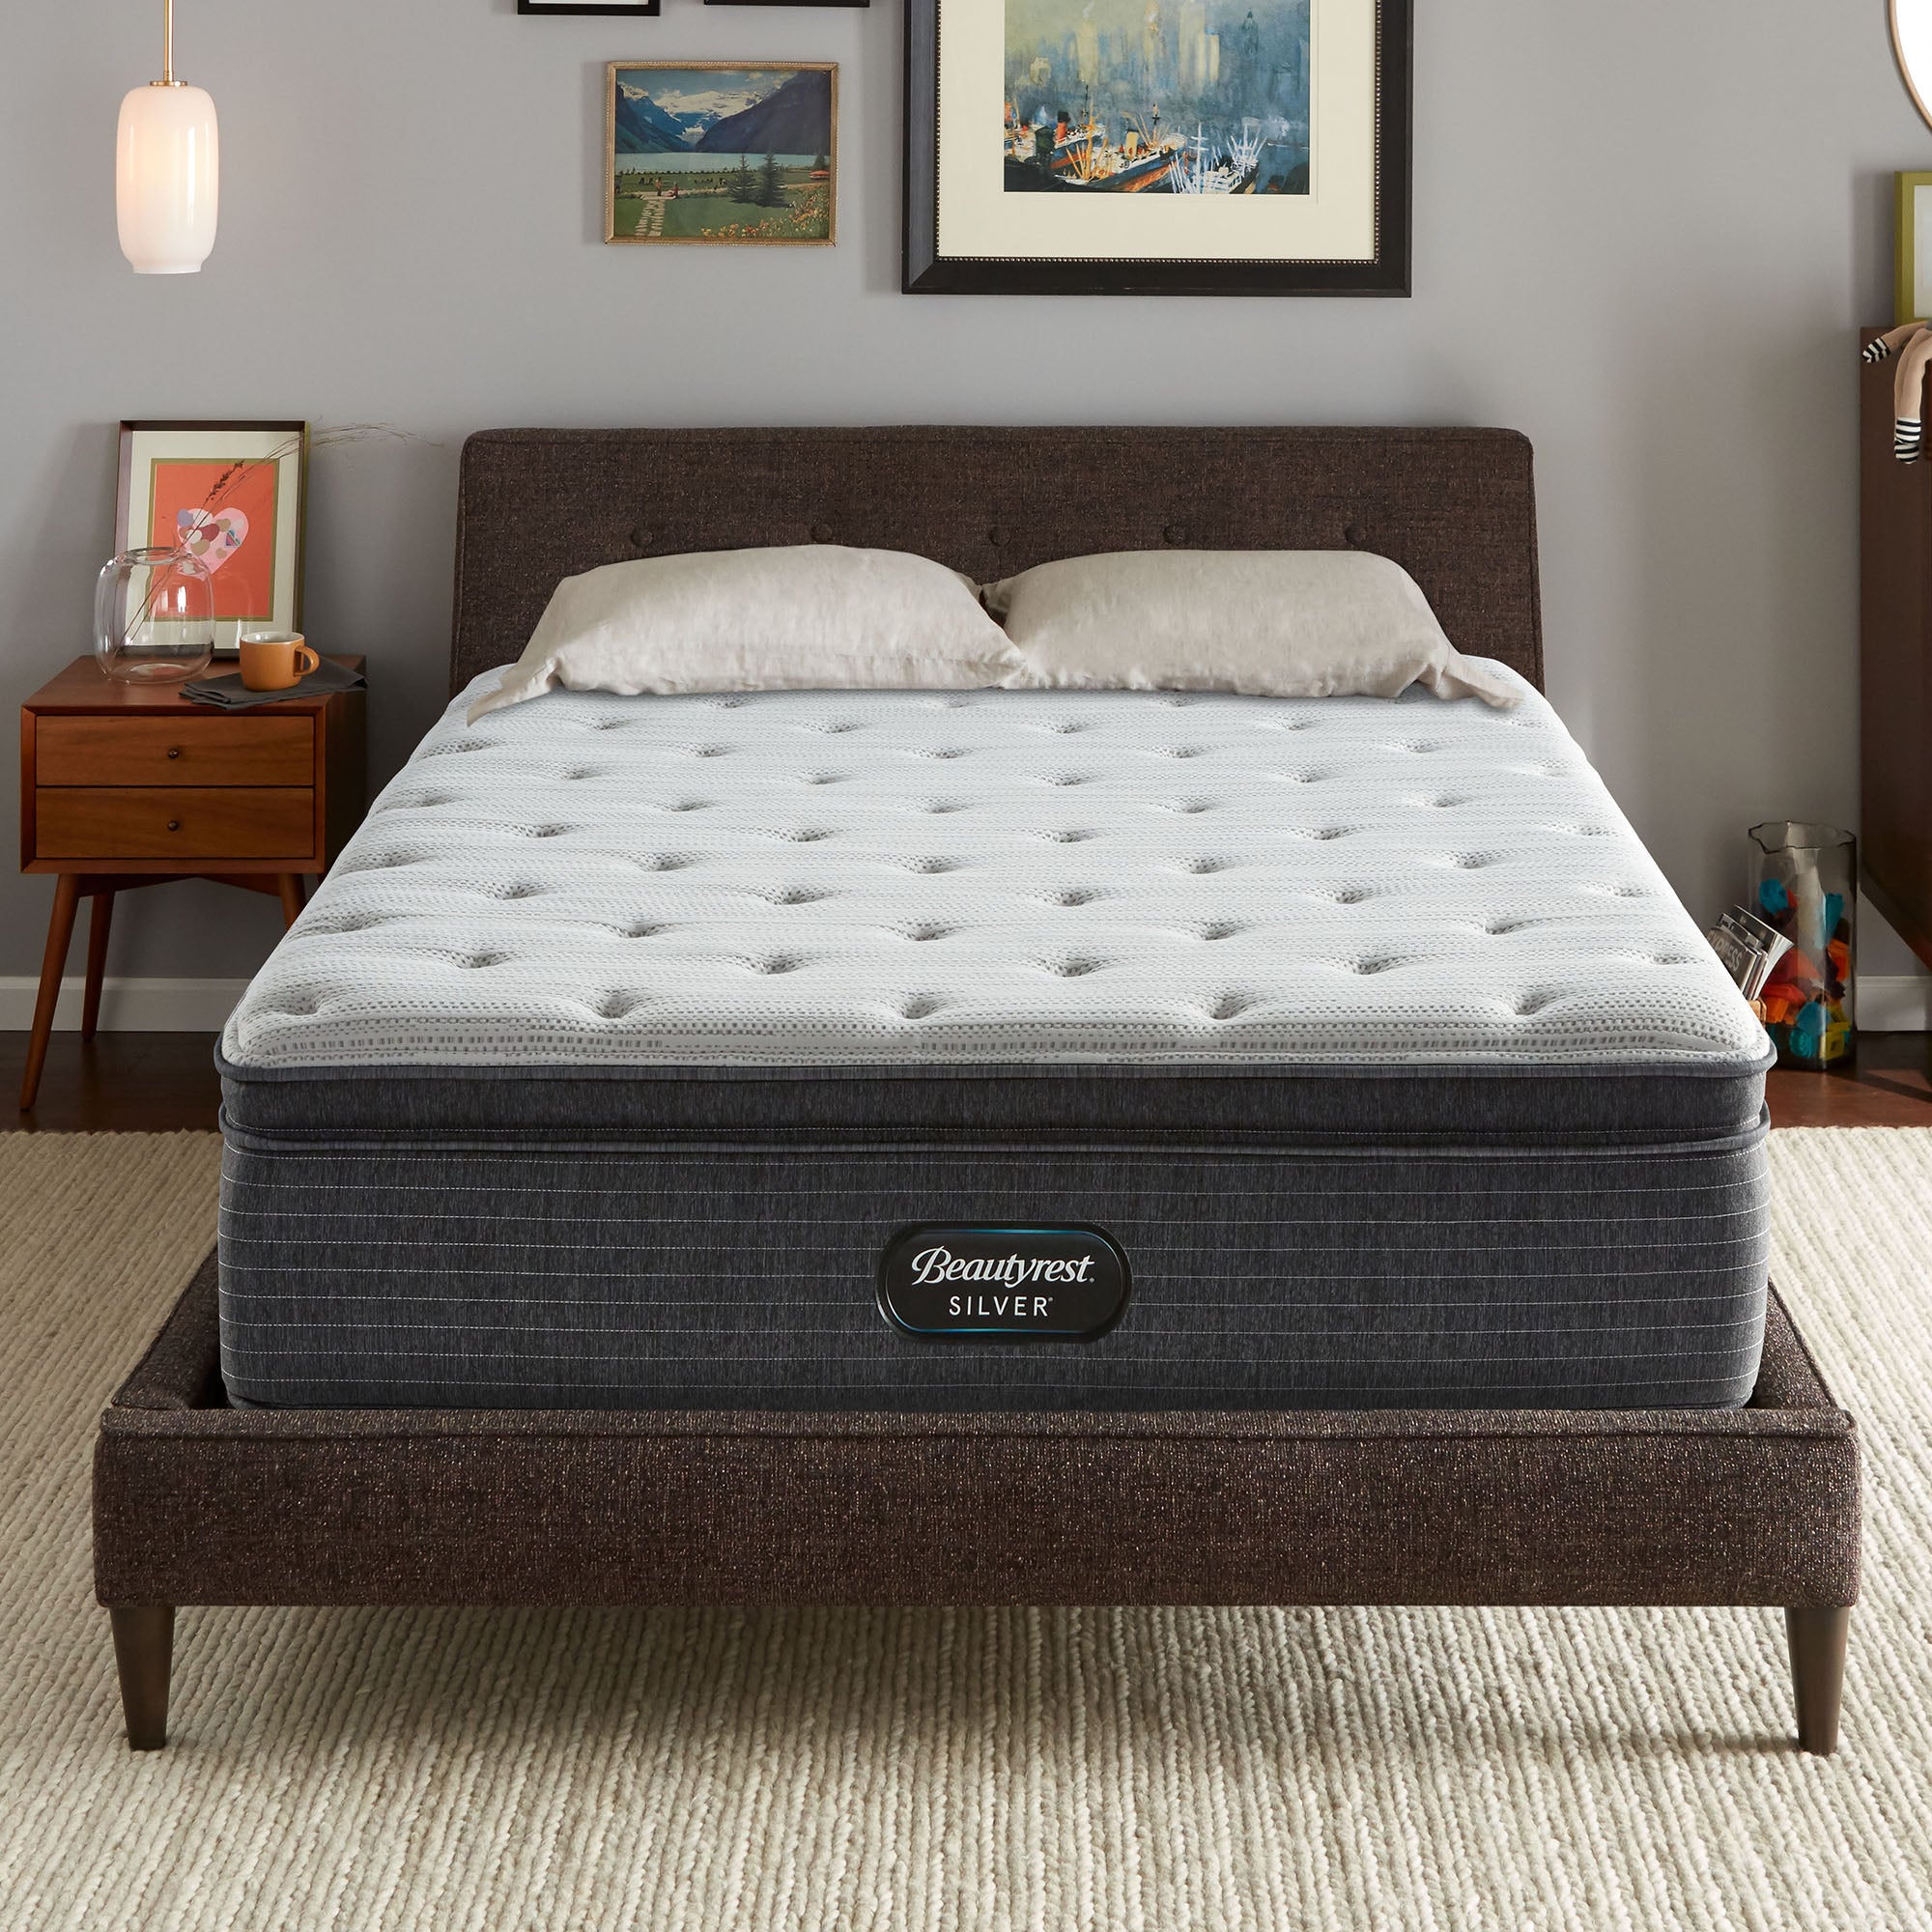 The Beautyrest Silver BRS900 Plush Pillow Top mattress in a bedroom on a brown bed